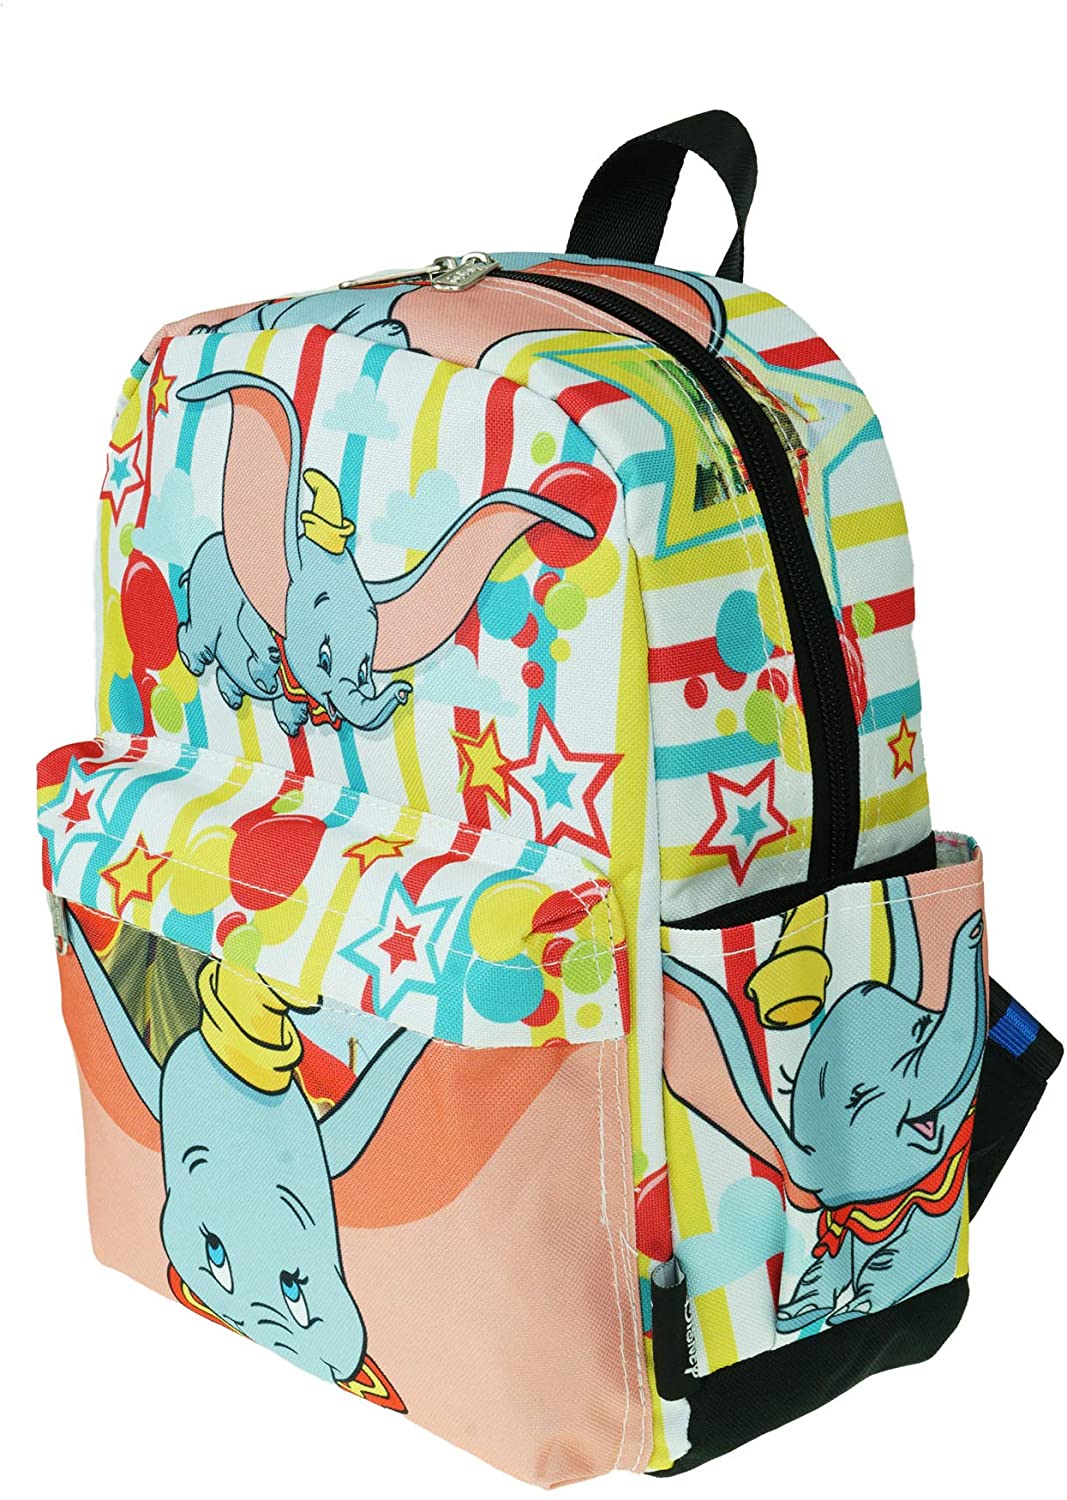 Dumbo 12" Deluxe Oversize Print Daypack - A21309 - GTE Zone